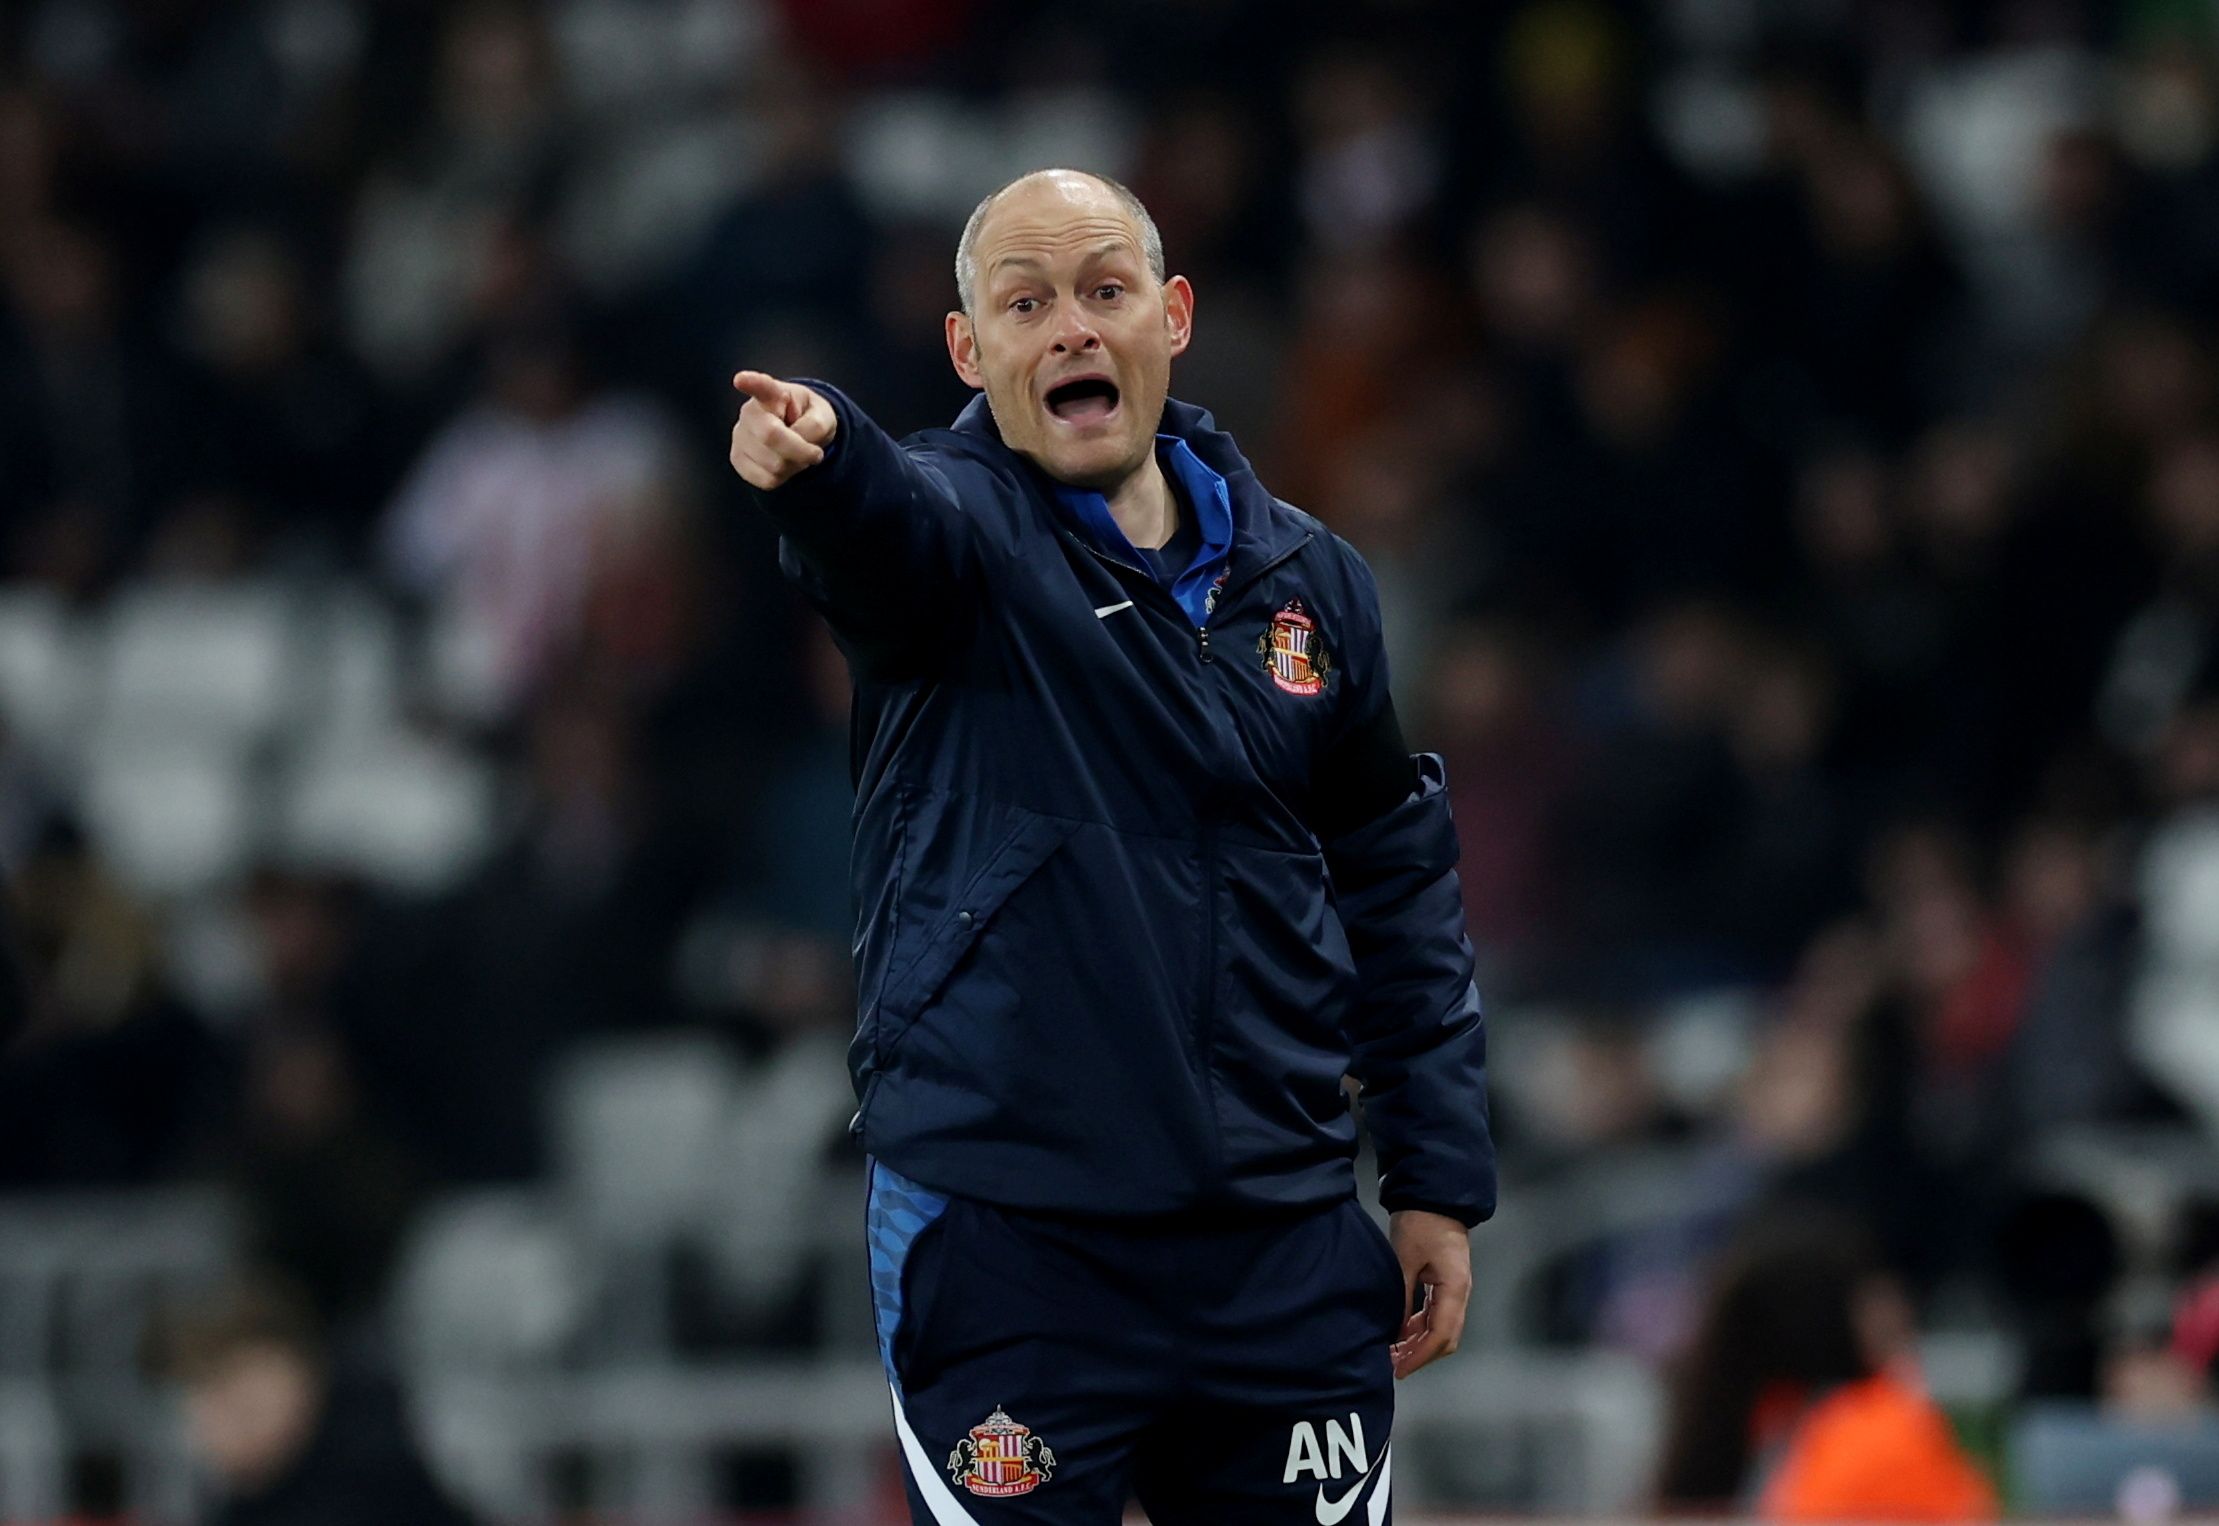 Soccer Football - League One - Sunderland v Fleetwood Town - Stadium of Light, Sunderland, Britain - March 8, 2022  Sunderland manager Alex Neil  Action Images/Lee Smith  EDITORIAL USE ONLY. No use with unauthorized audio, video, data, fixture lists, club/league logos or 